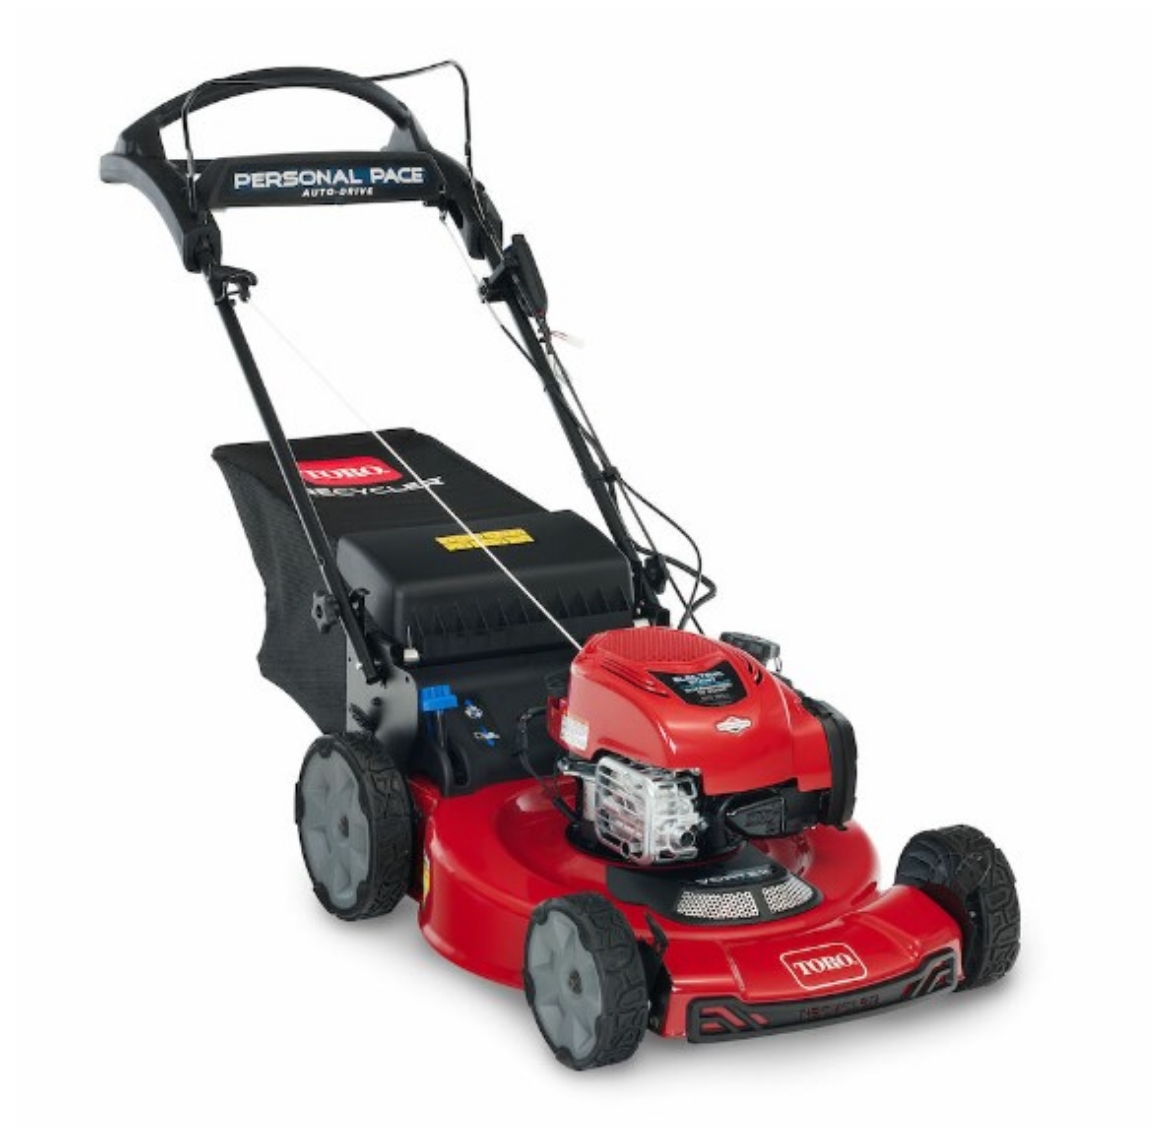 Picture of Toro 22" (56cm) Personal Pace Mower, Elect Start, B&S Engine